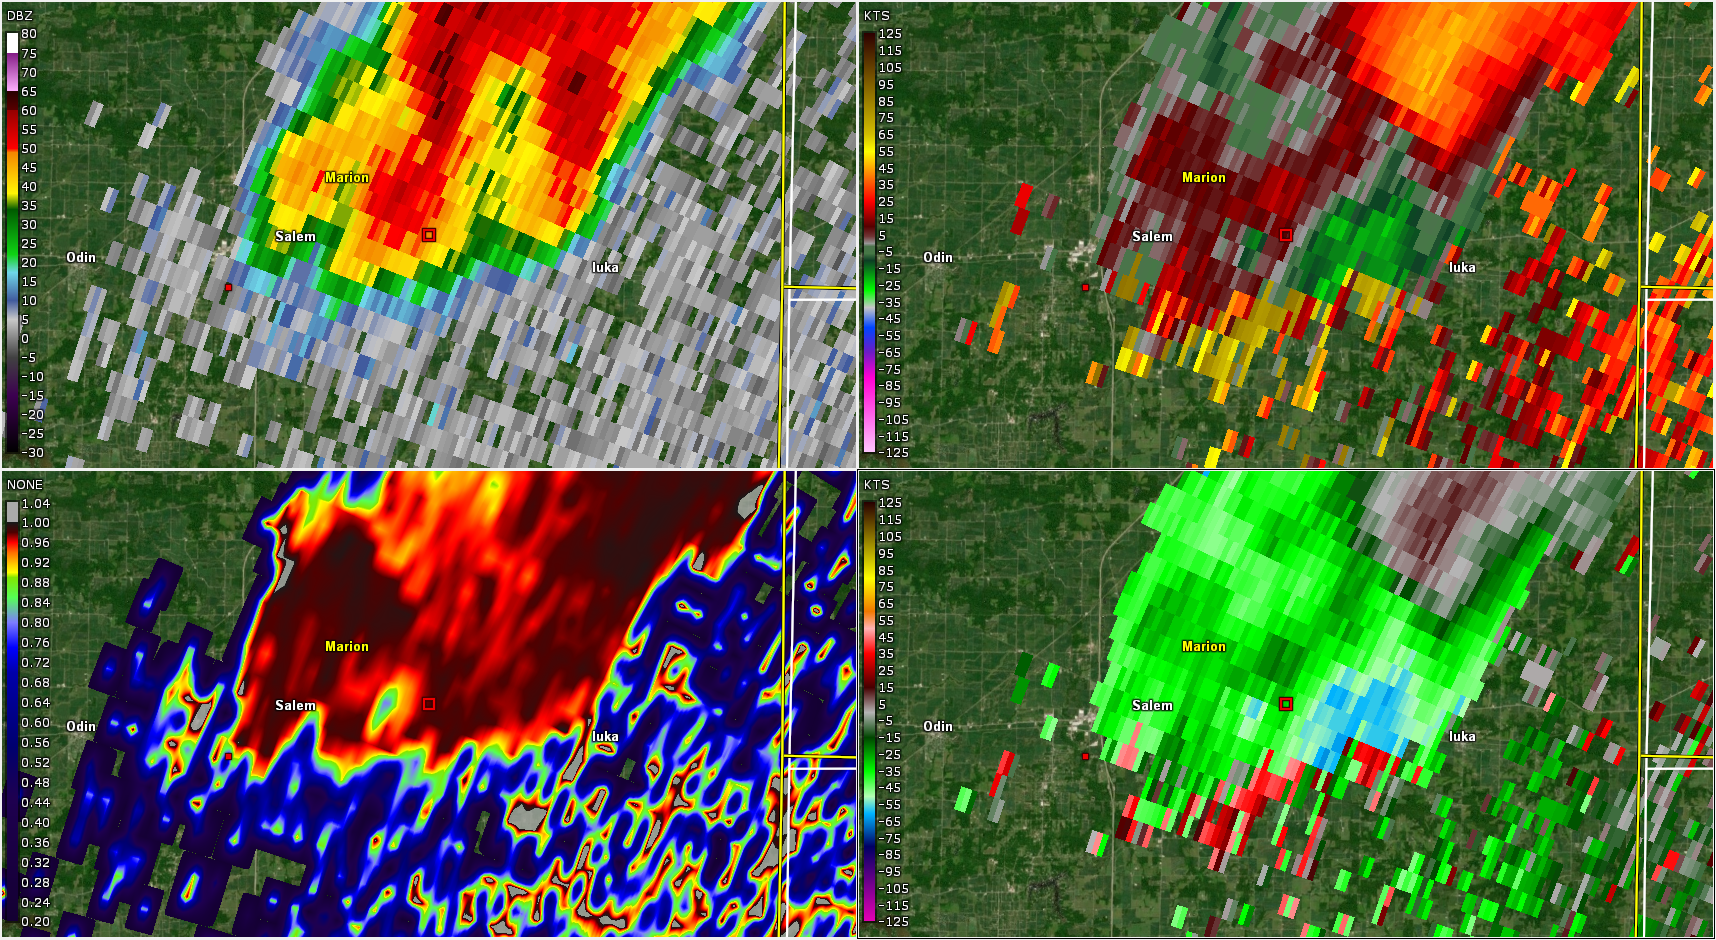 4-Panel Radar Image from KVWX in Evansville, IN at 818 pm, as a tornado crossed US Route 50 in Salem Illinois. Products are from half degree elevation slice.